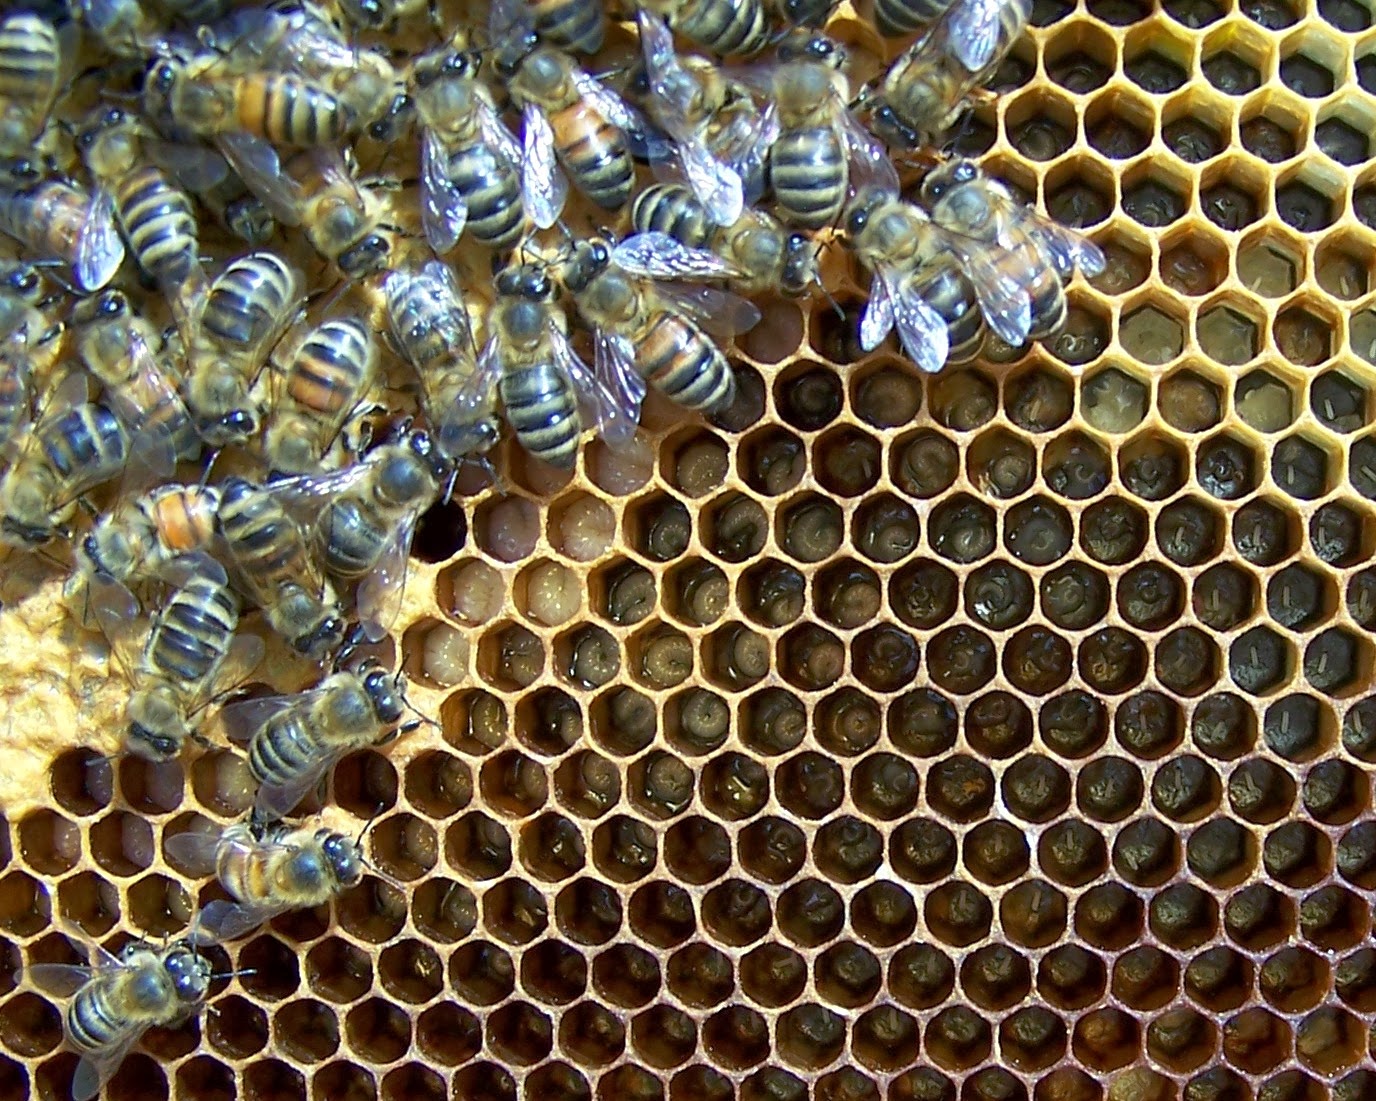 Hive. The Hive. Beehive Oxford. Hive Cells. Hive Organism.